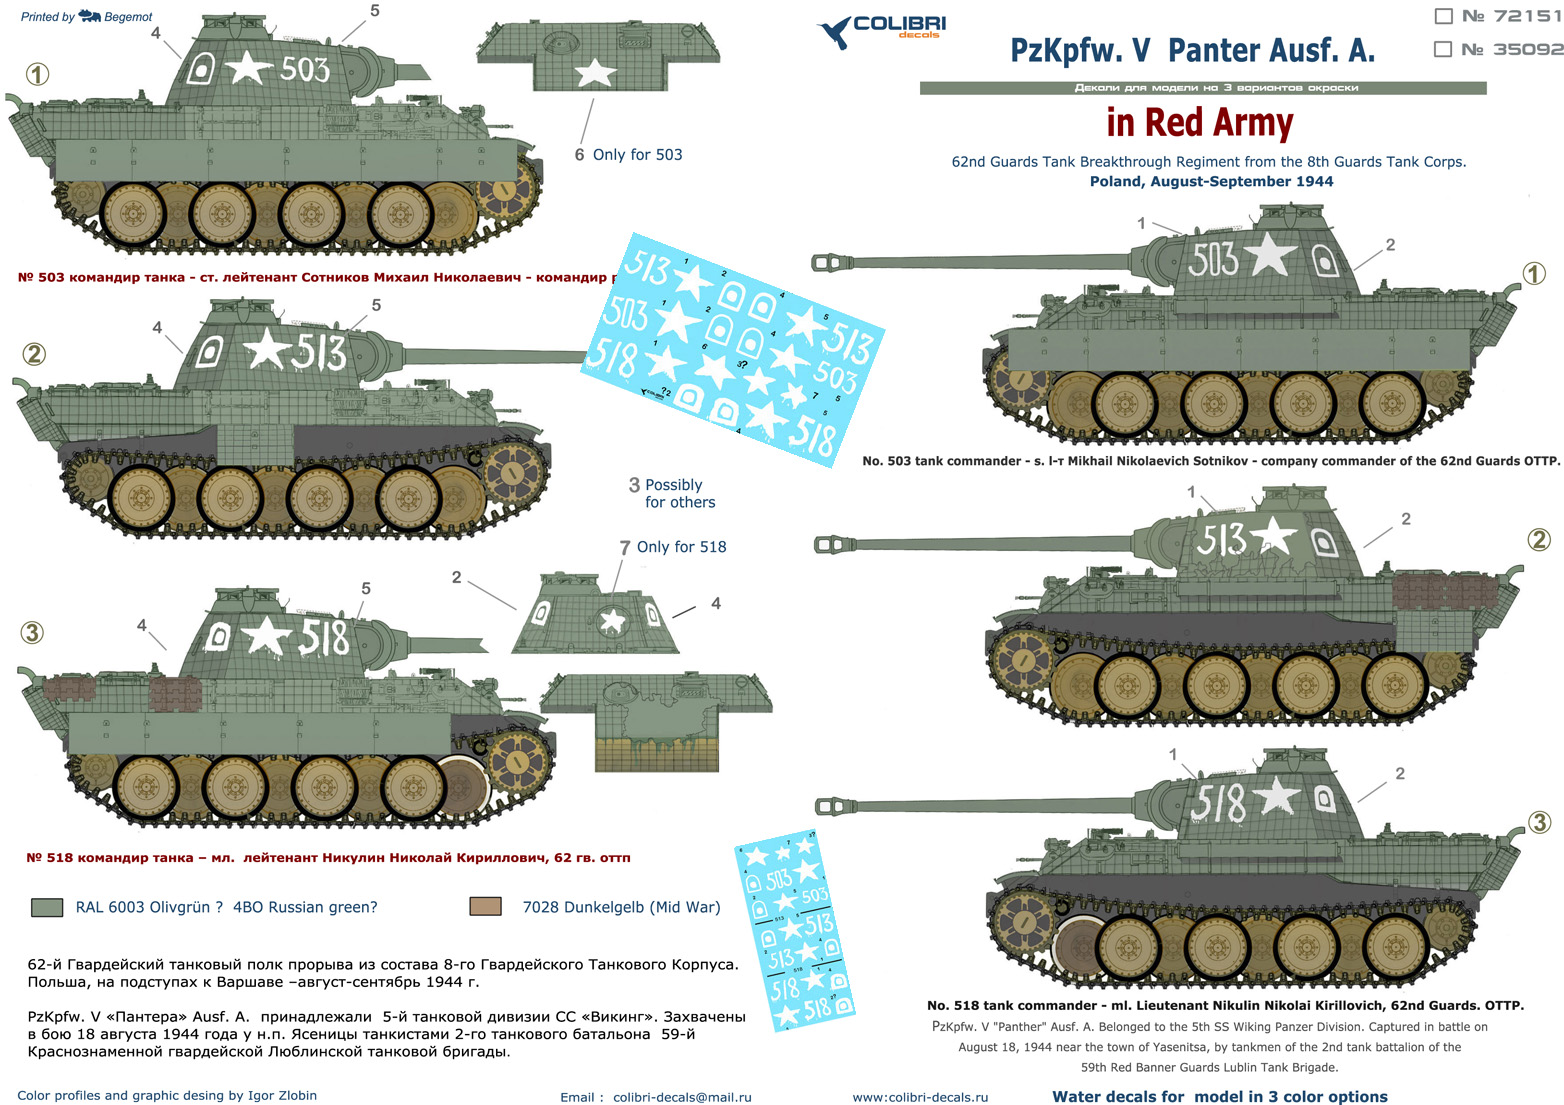 Decal 1/72 Pz.Kpfw.V Panter Ausf. A in Red Army (Colibri Decals)